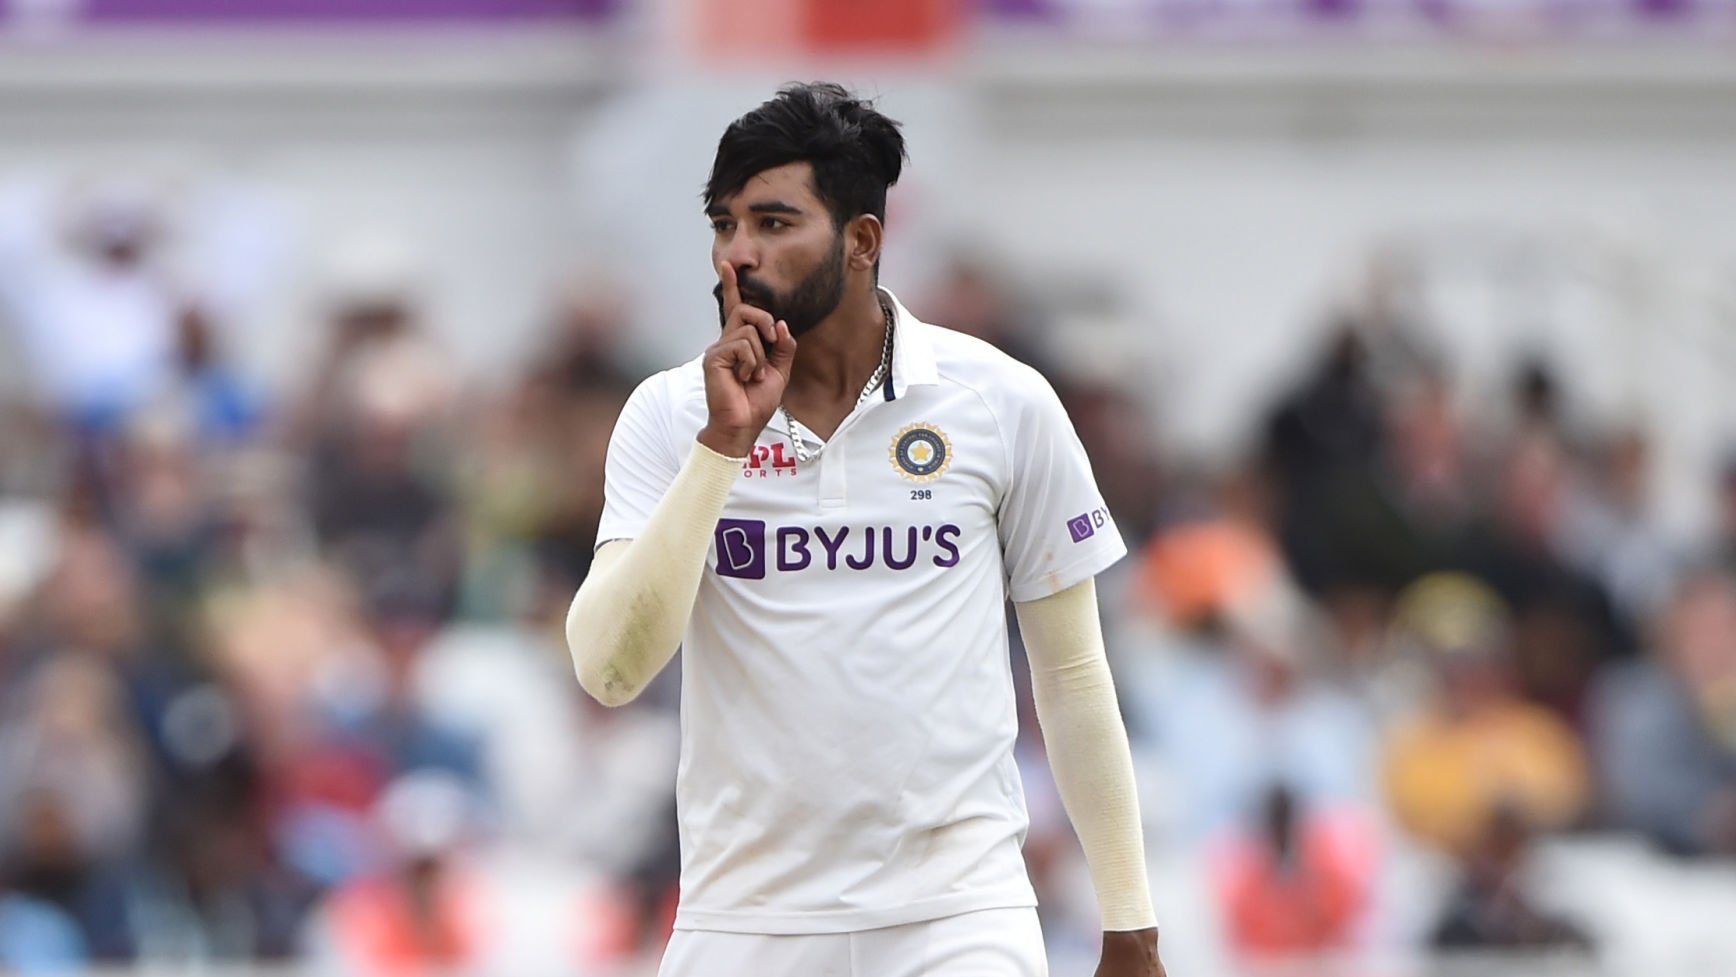 IND vs ENG | Twitter reacts as Mohammed Siraj drops a sitter to give well set Haseeb Hameed a lifeline 